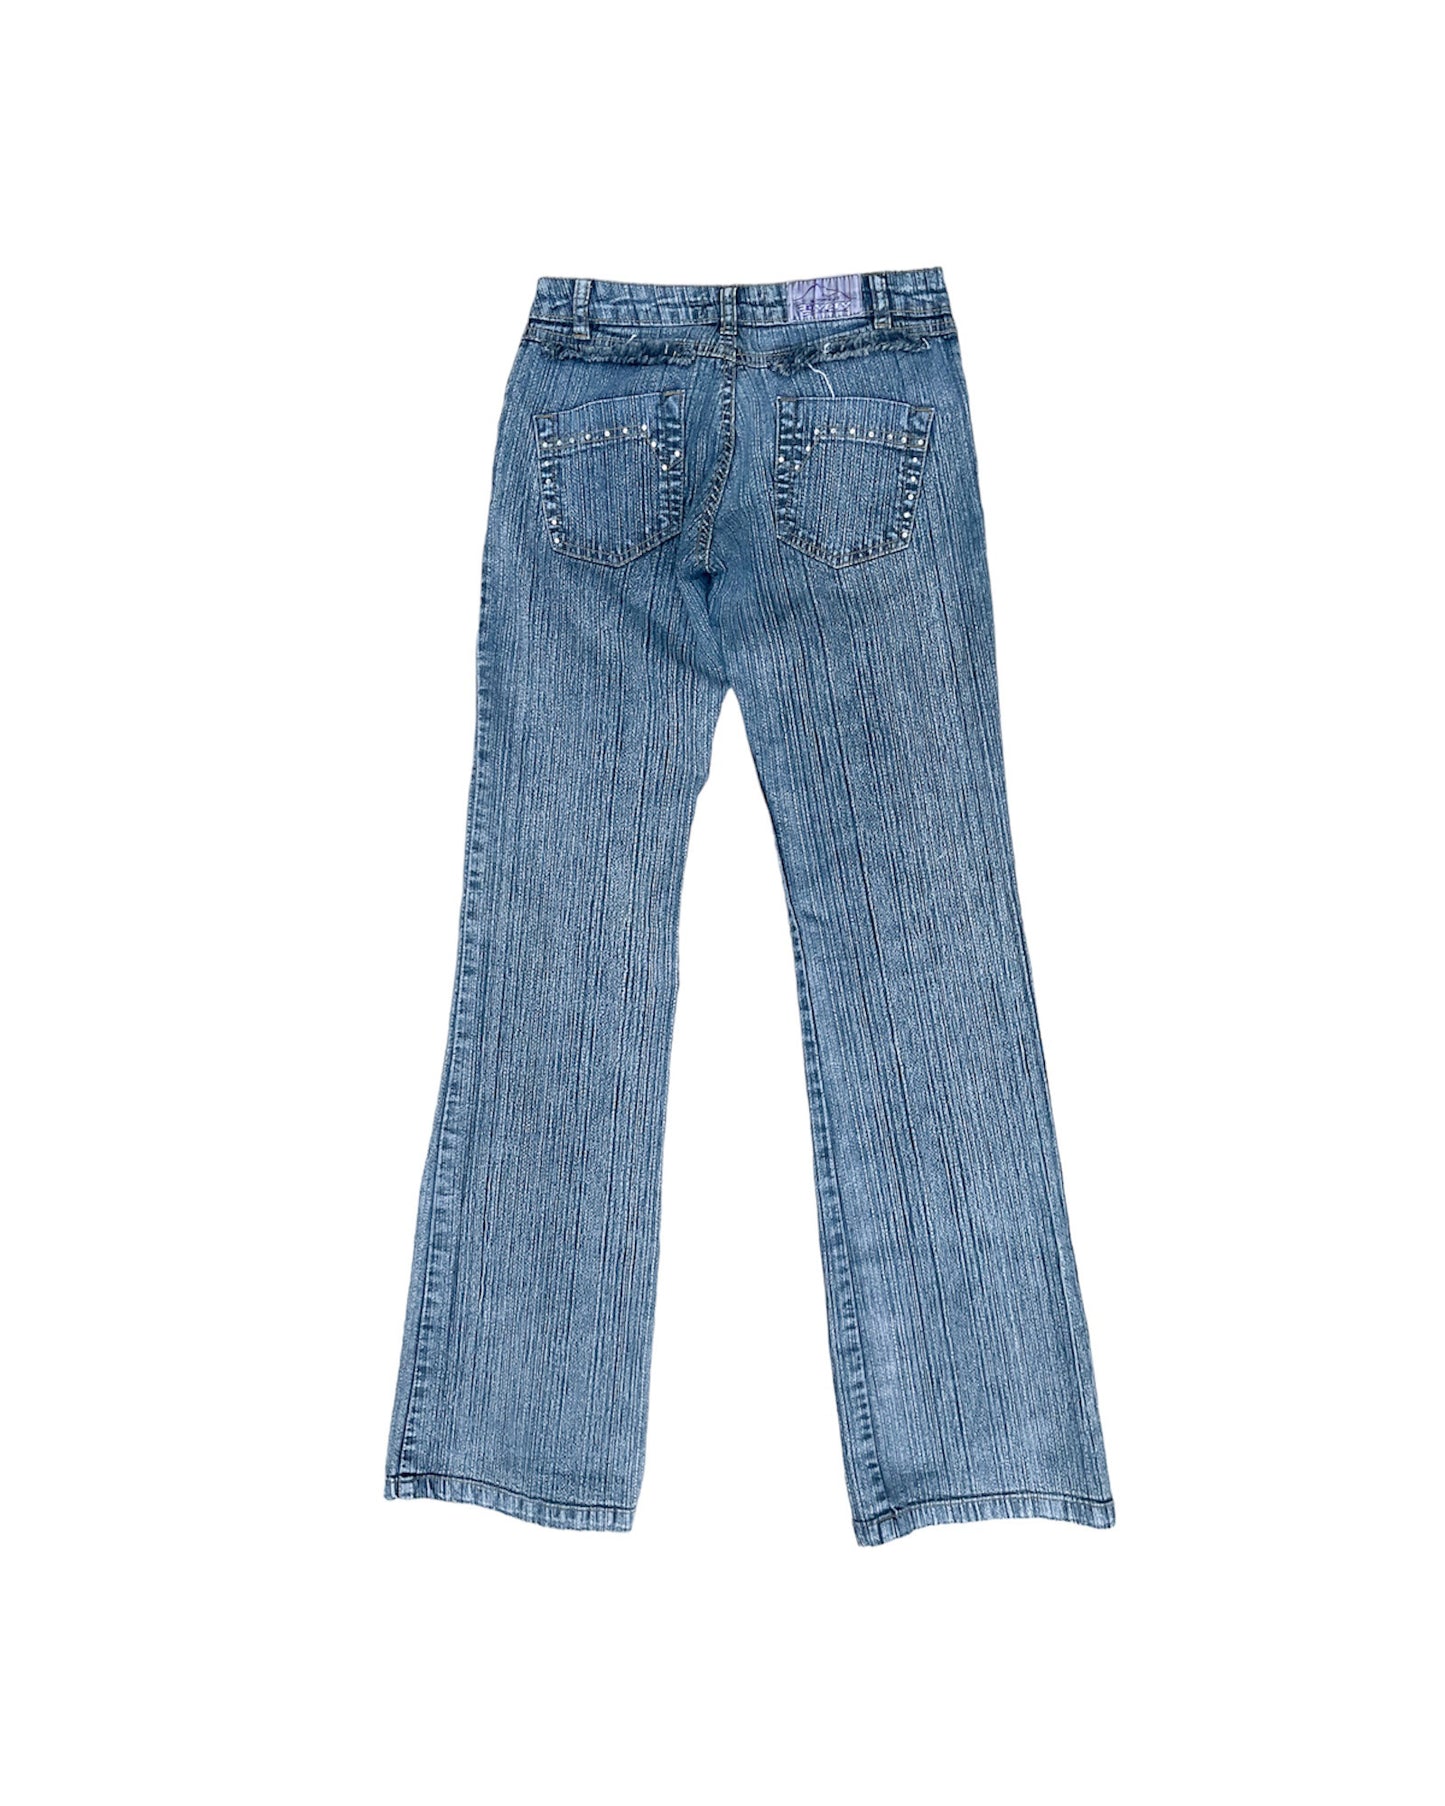 2000s very bedazzles low rise flare jeans